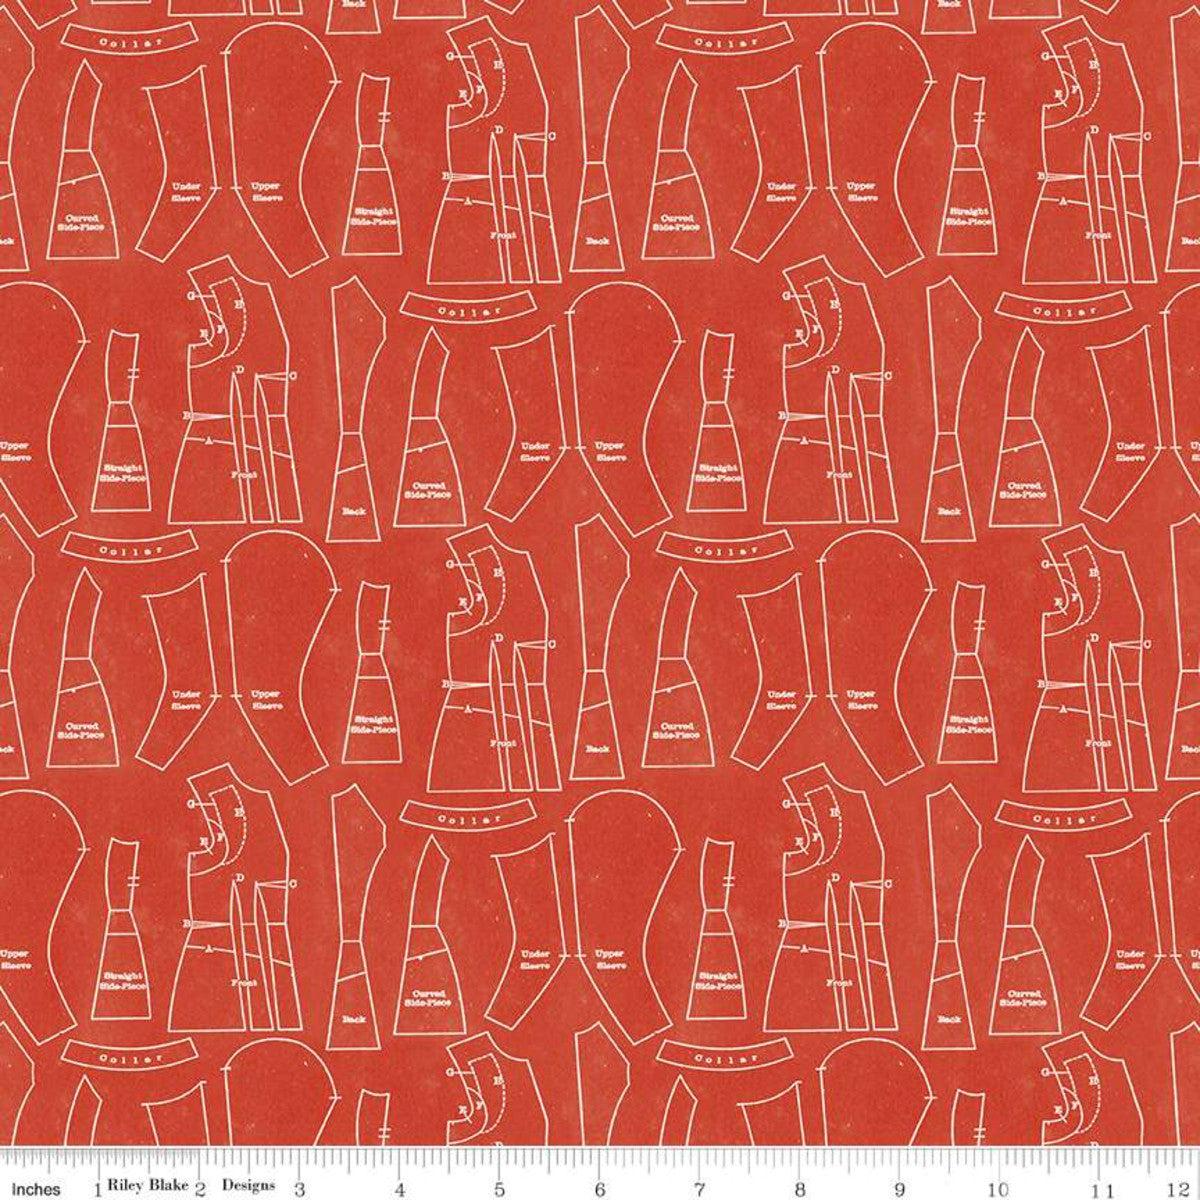 Fabric, Red Hot Sewing Patterns by J. Wecker Frisch - RED (by the yard)